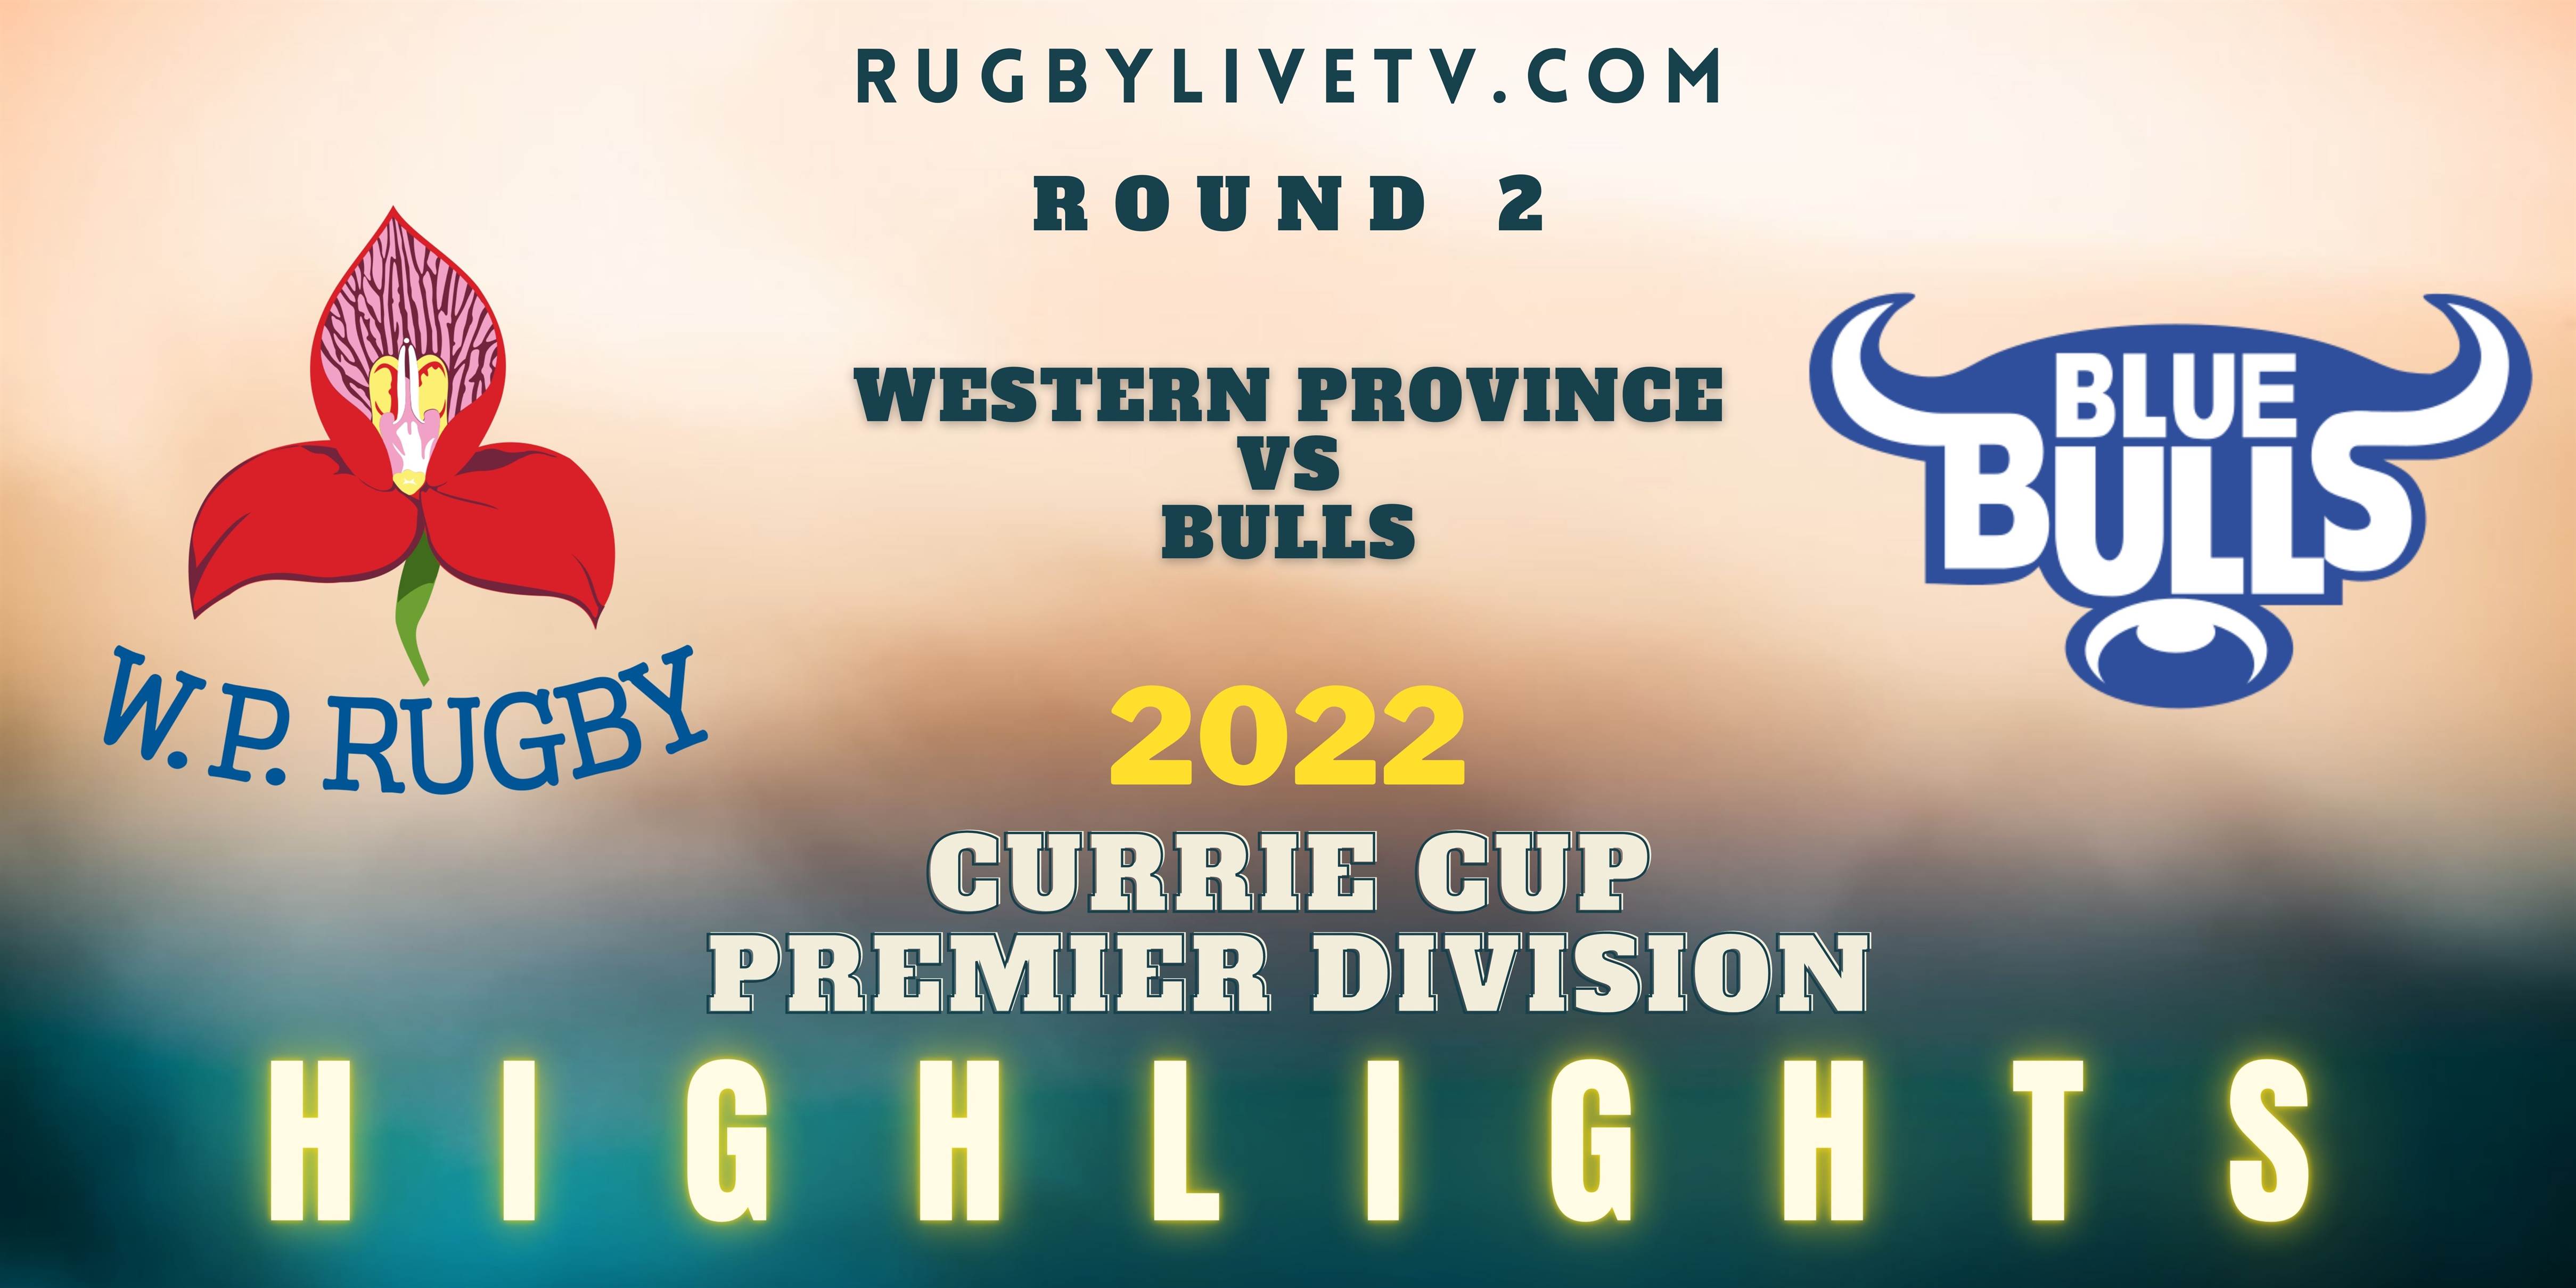 Western Province Vs Bulls Currie Cup Highlights 2022 Rd 2